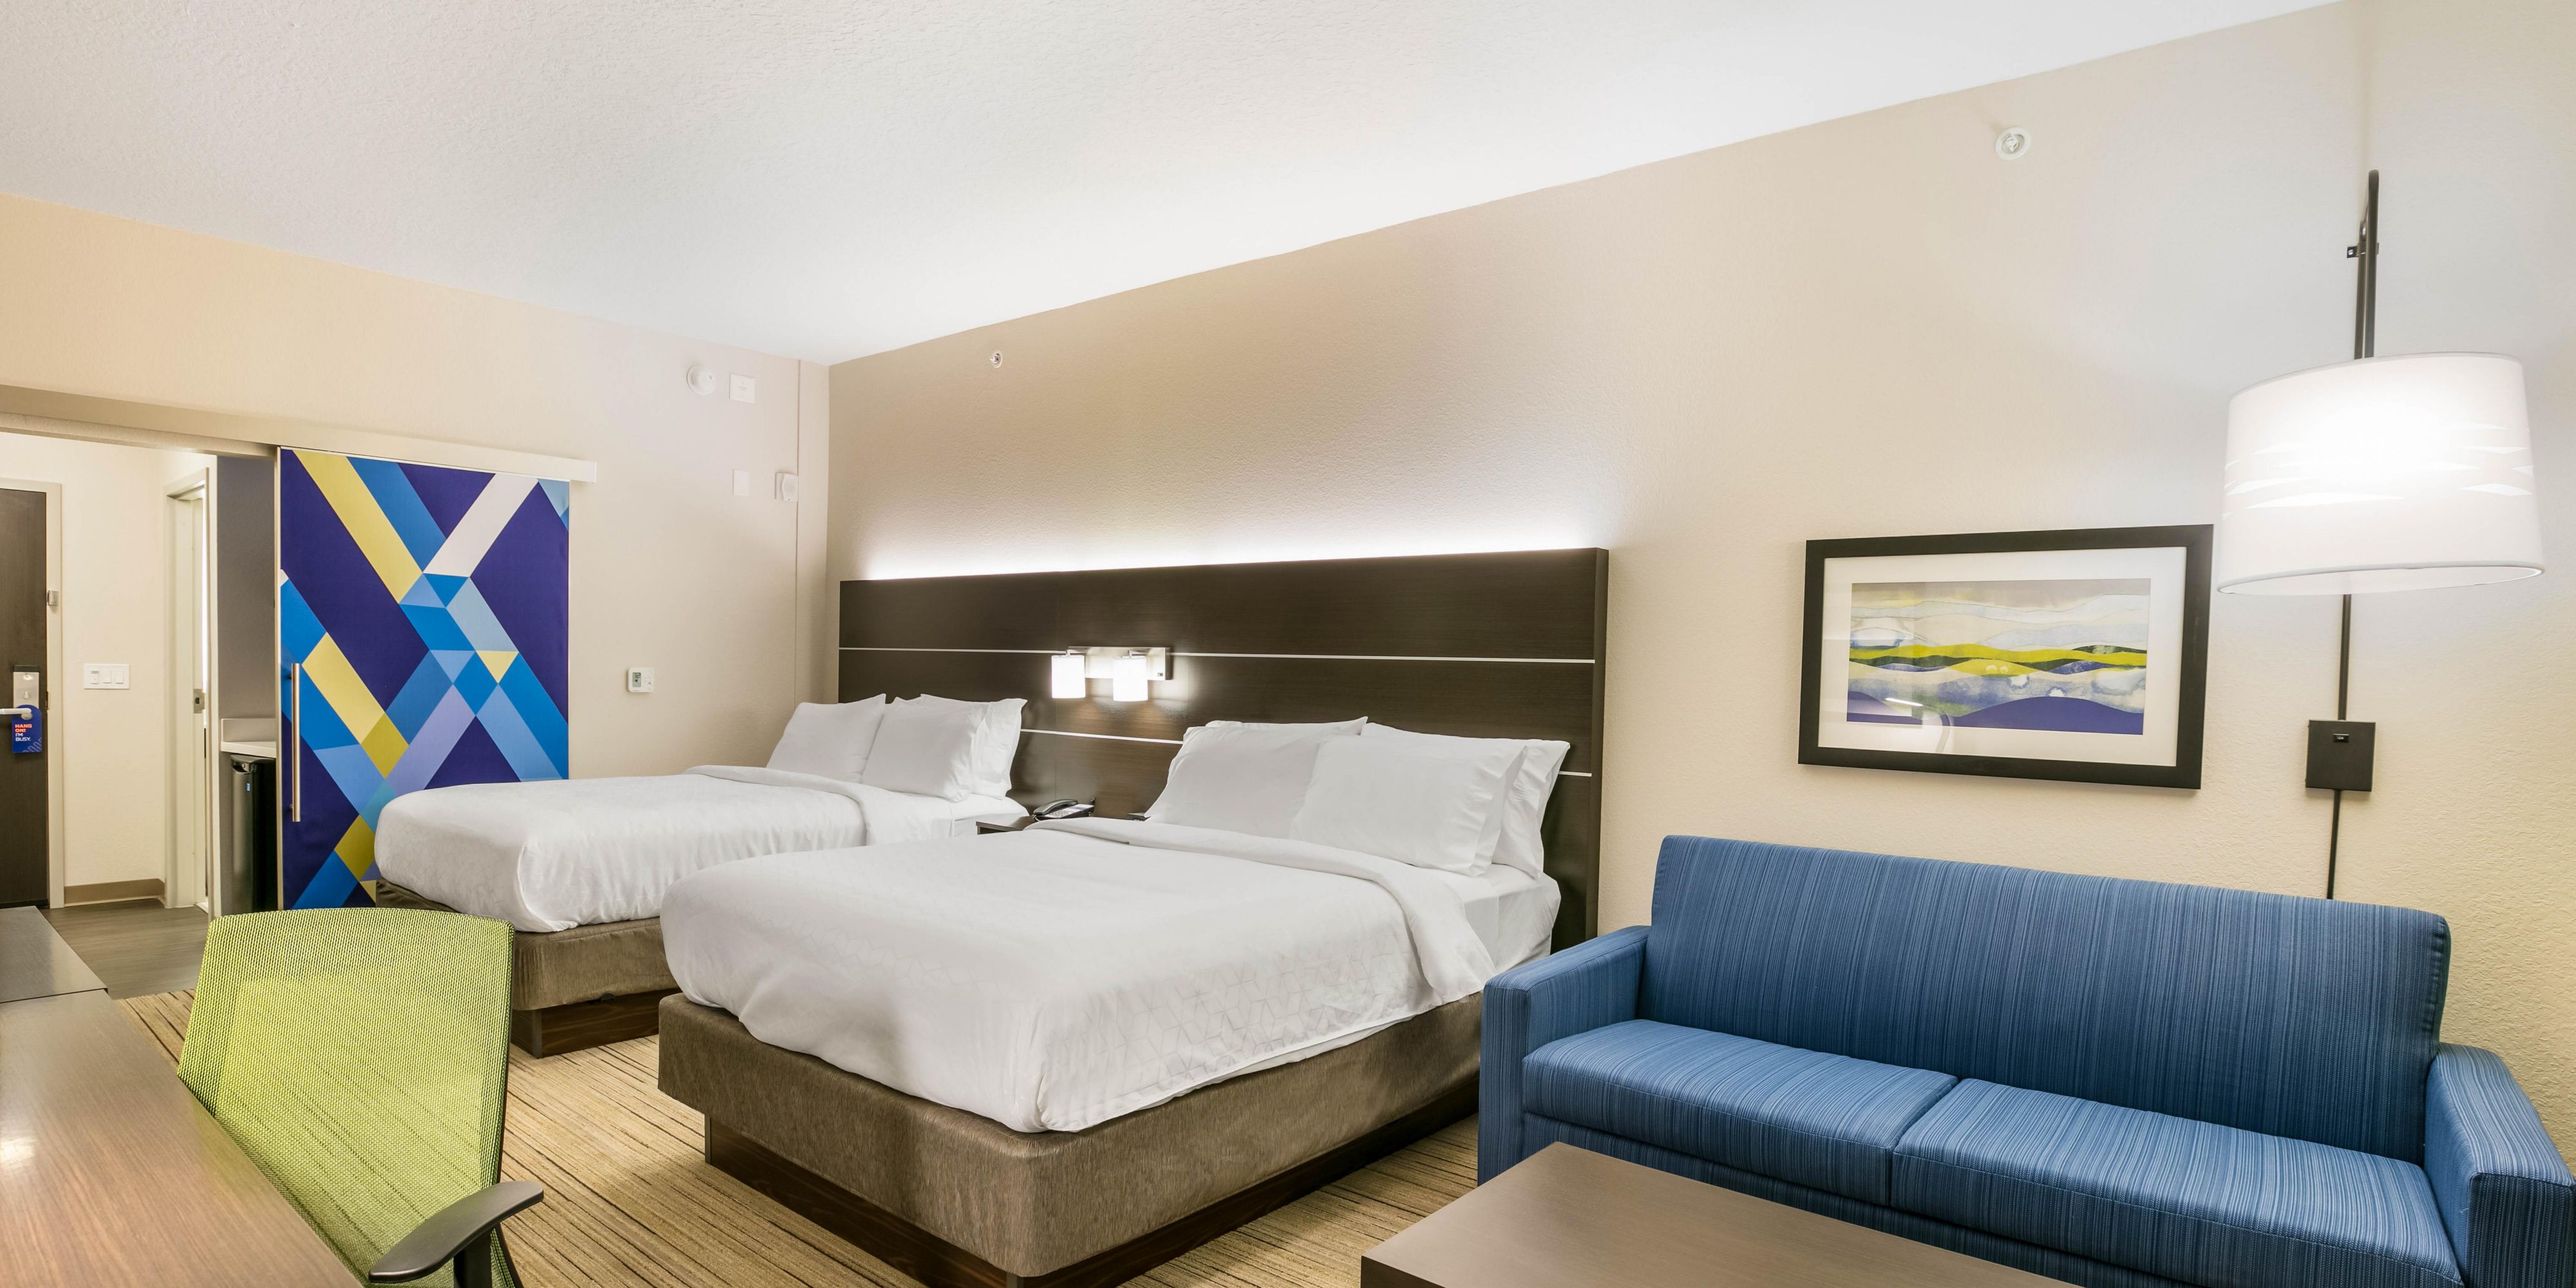 Rest easy in our perfectly designed rooms and suites where you can feel at home near the University of North Florida. Get a great night’s sleep with our Express Recharge, featuring plush duvets and a variety of firm or soft pillows.